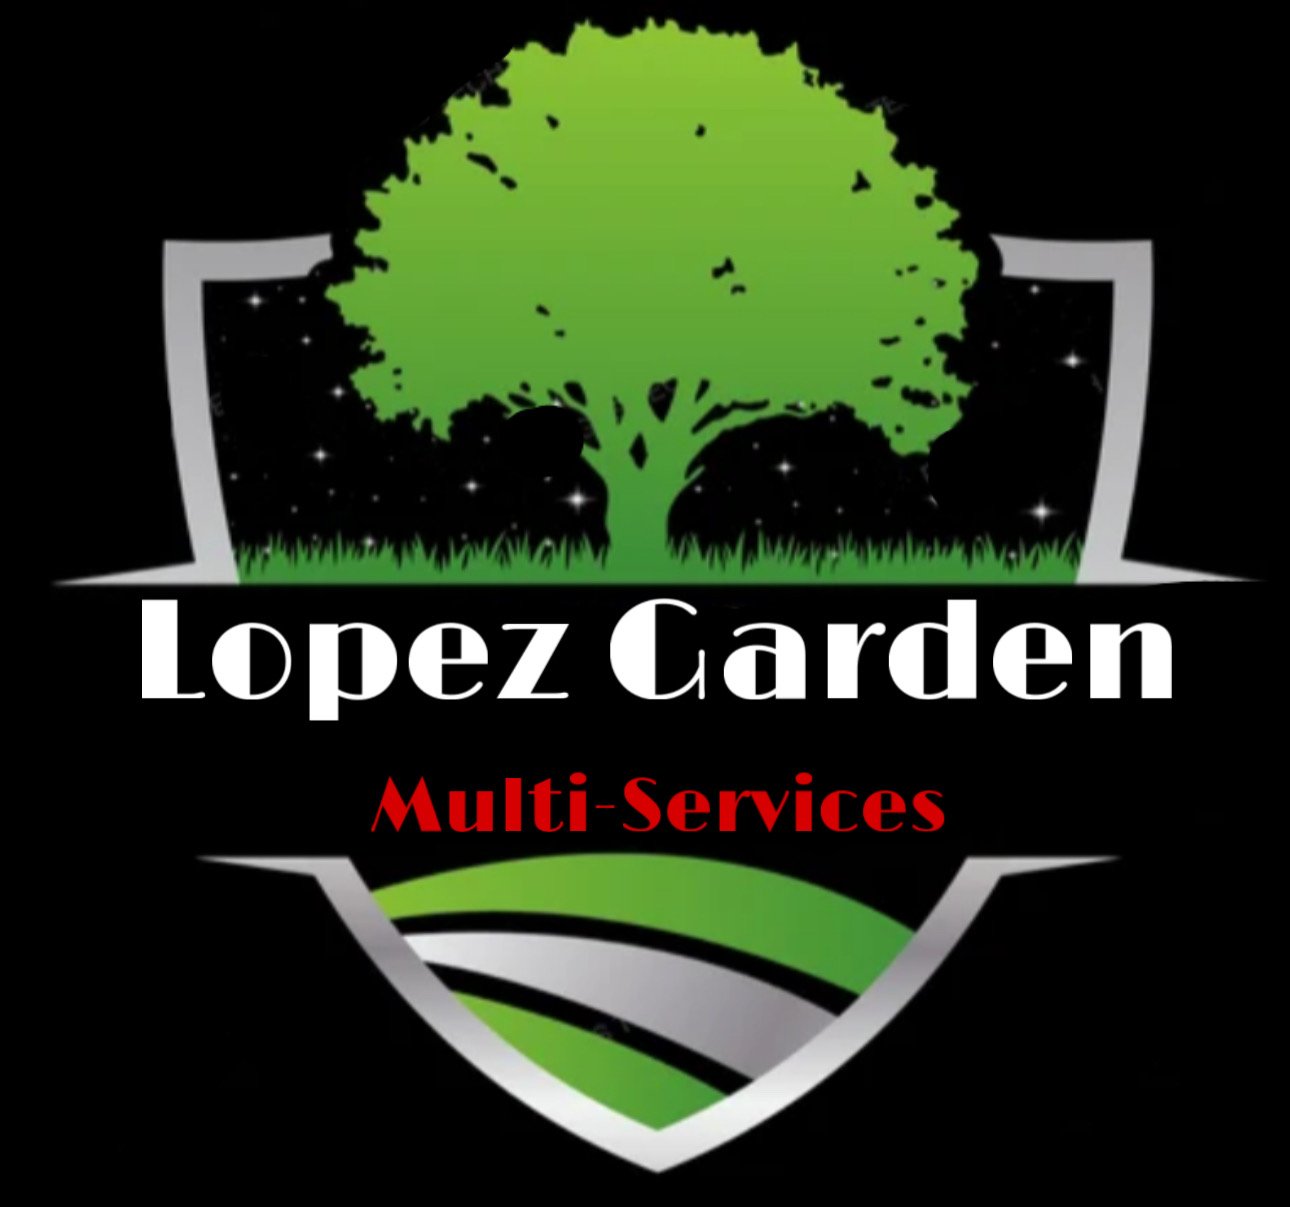 Lopez Garden, Landscaping and Multi-Services